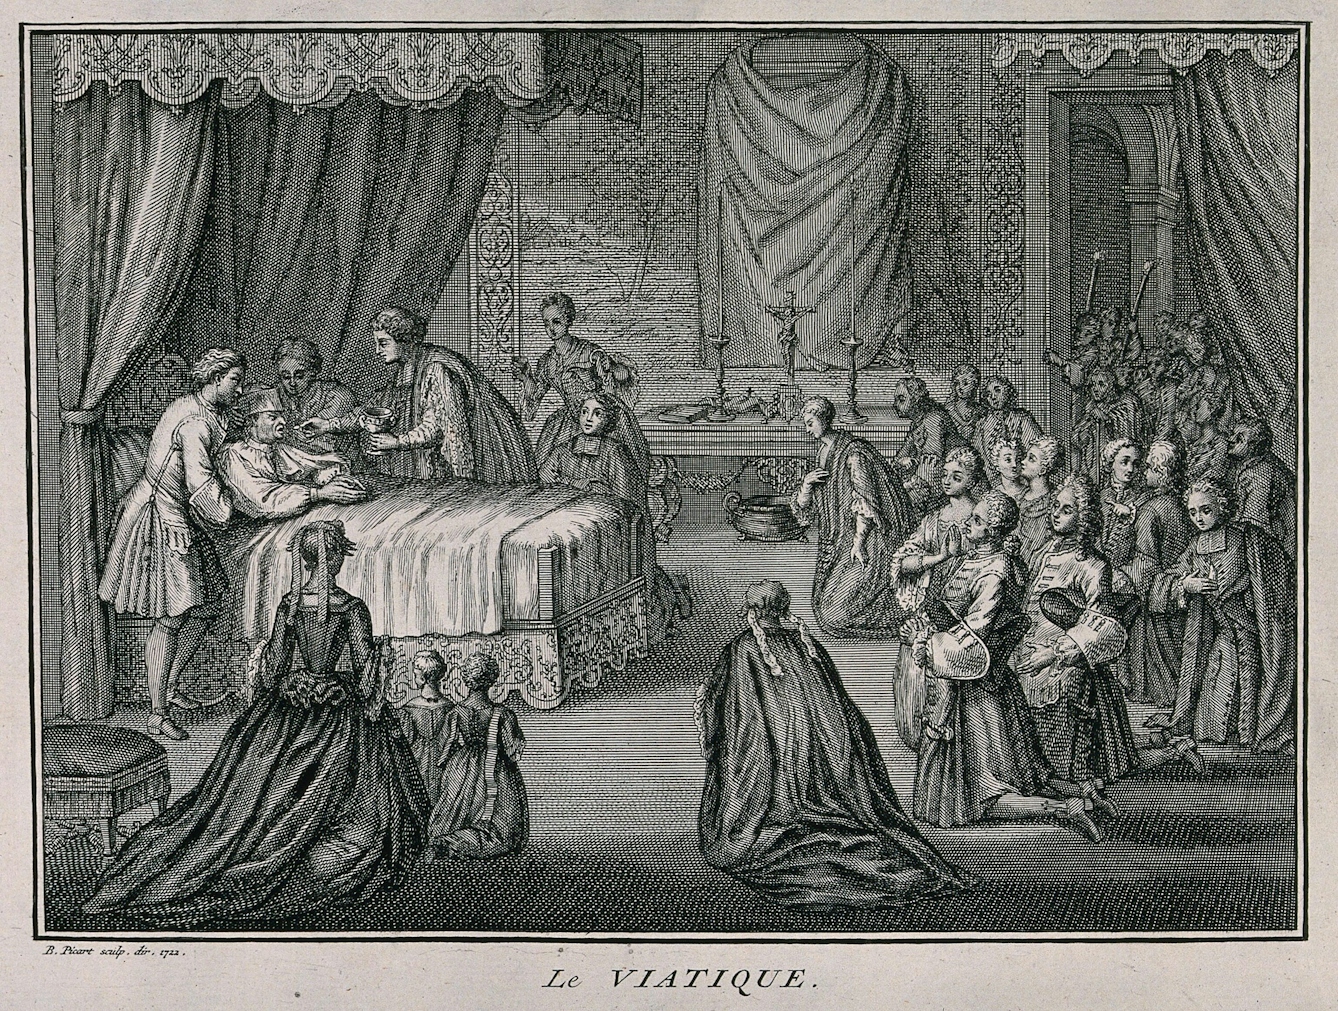 Black ink engraving showing a priest administering the Eucharist to a dying man who lays in a bed surrounded by people kneeling, crossing themselves and praying.